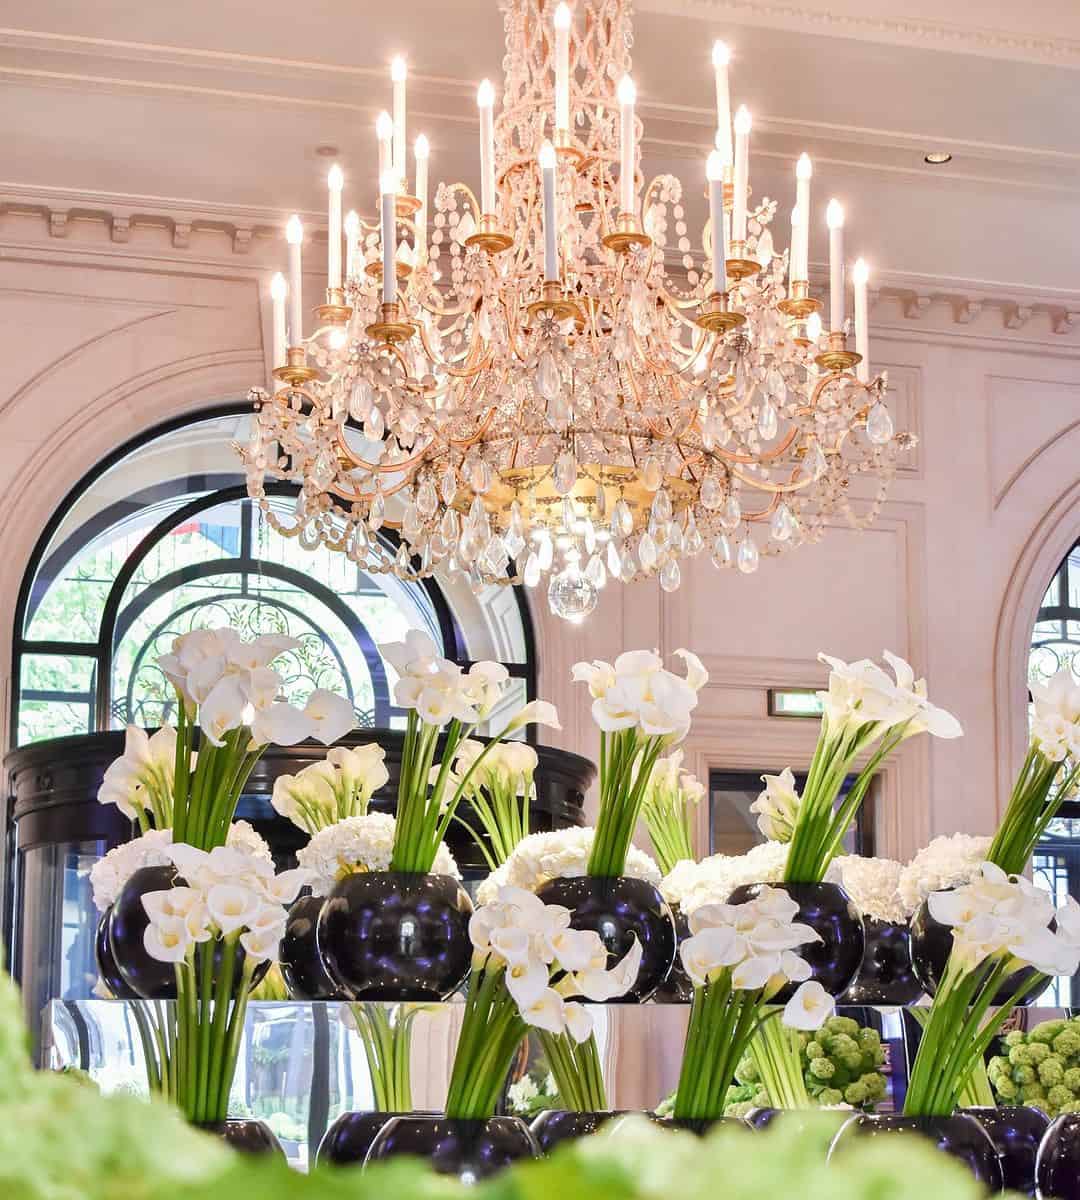 An essential part of the George V's grandeur is its phenomenal floral display. Orchestrated by the hotel's artistic director, Jeff Leatham